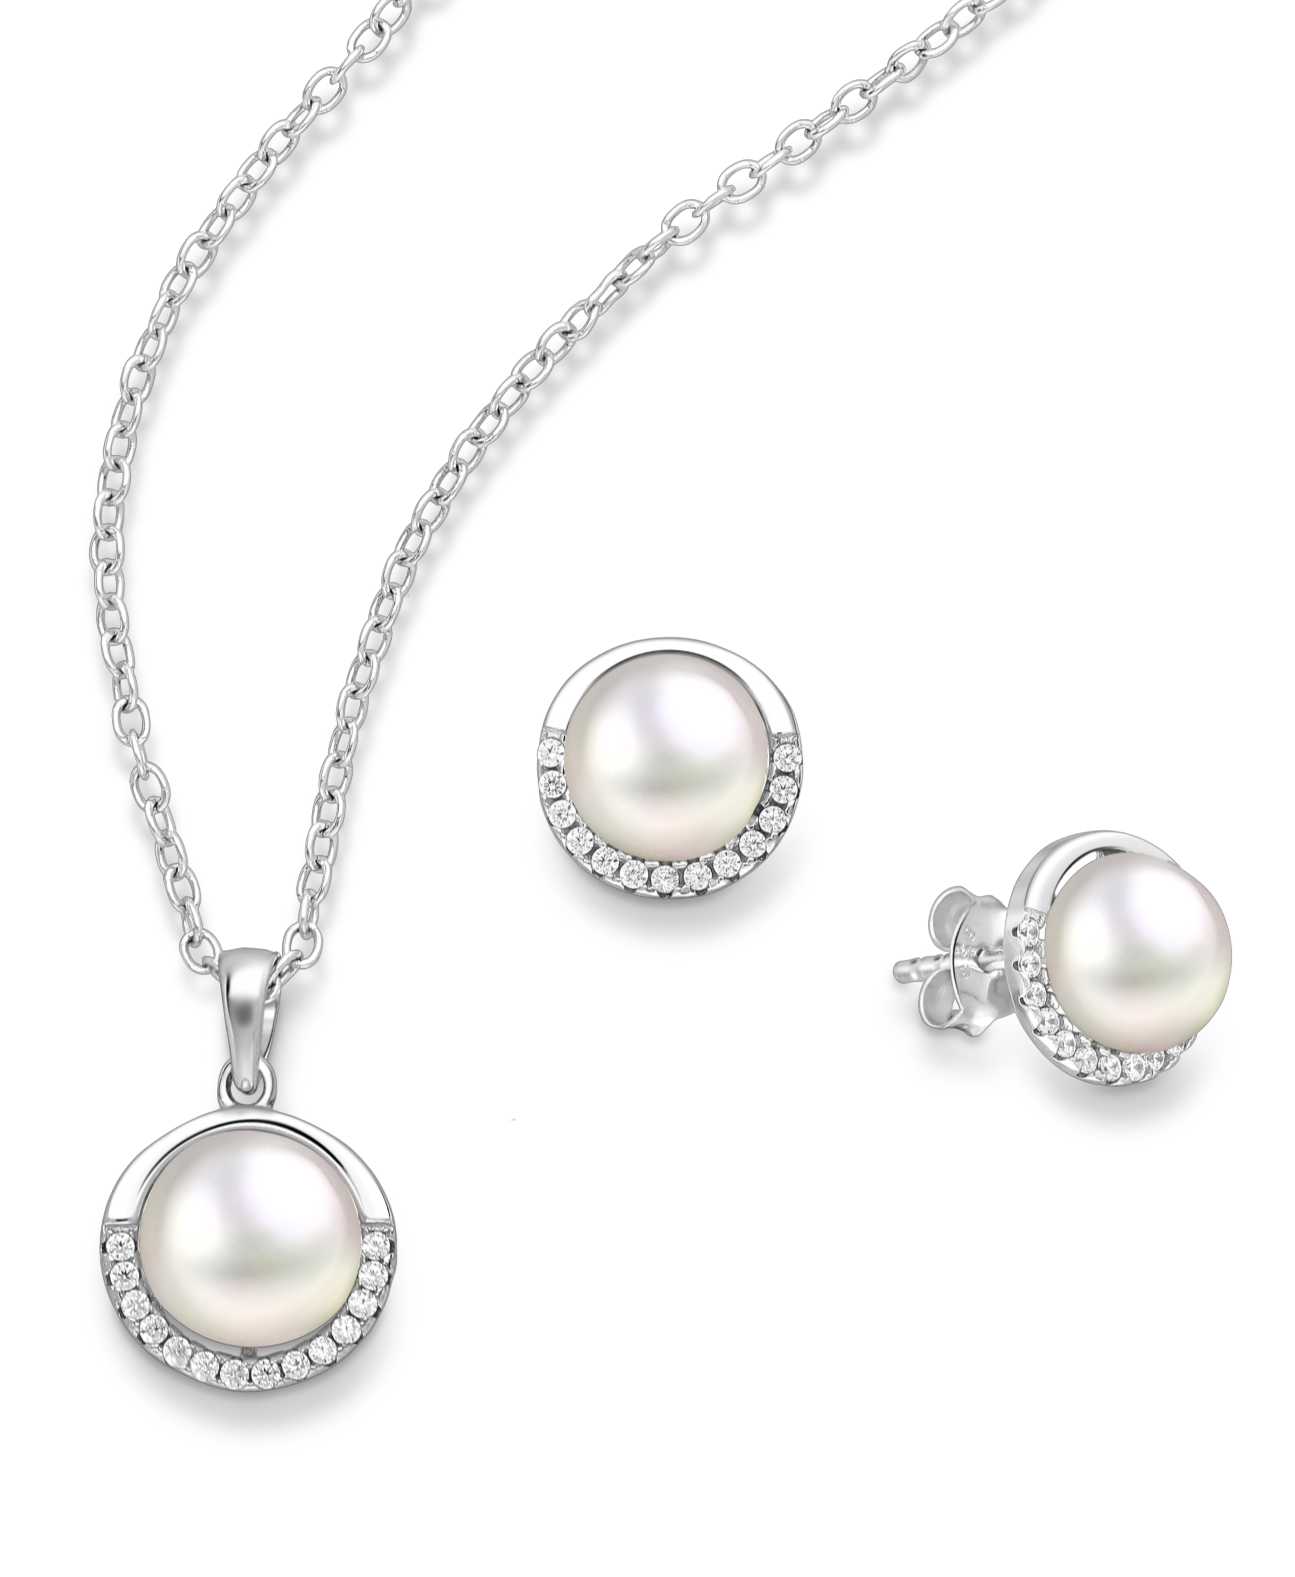 Freshwater Pearl Studs & Pendant Set in Sterling Silver with CZ Stimulated Diamonds